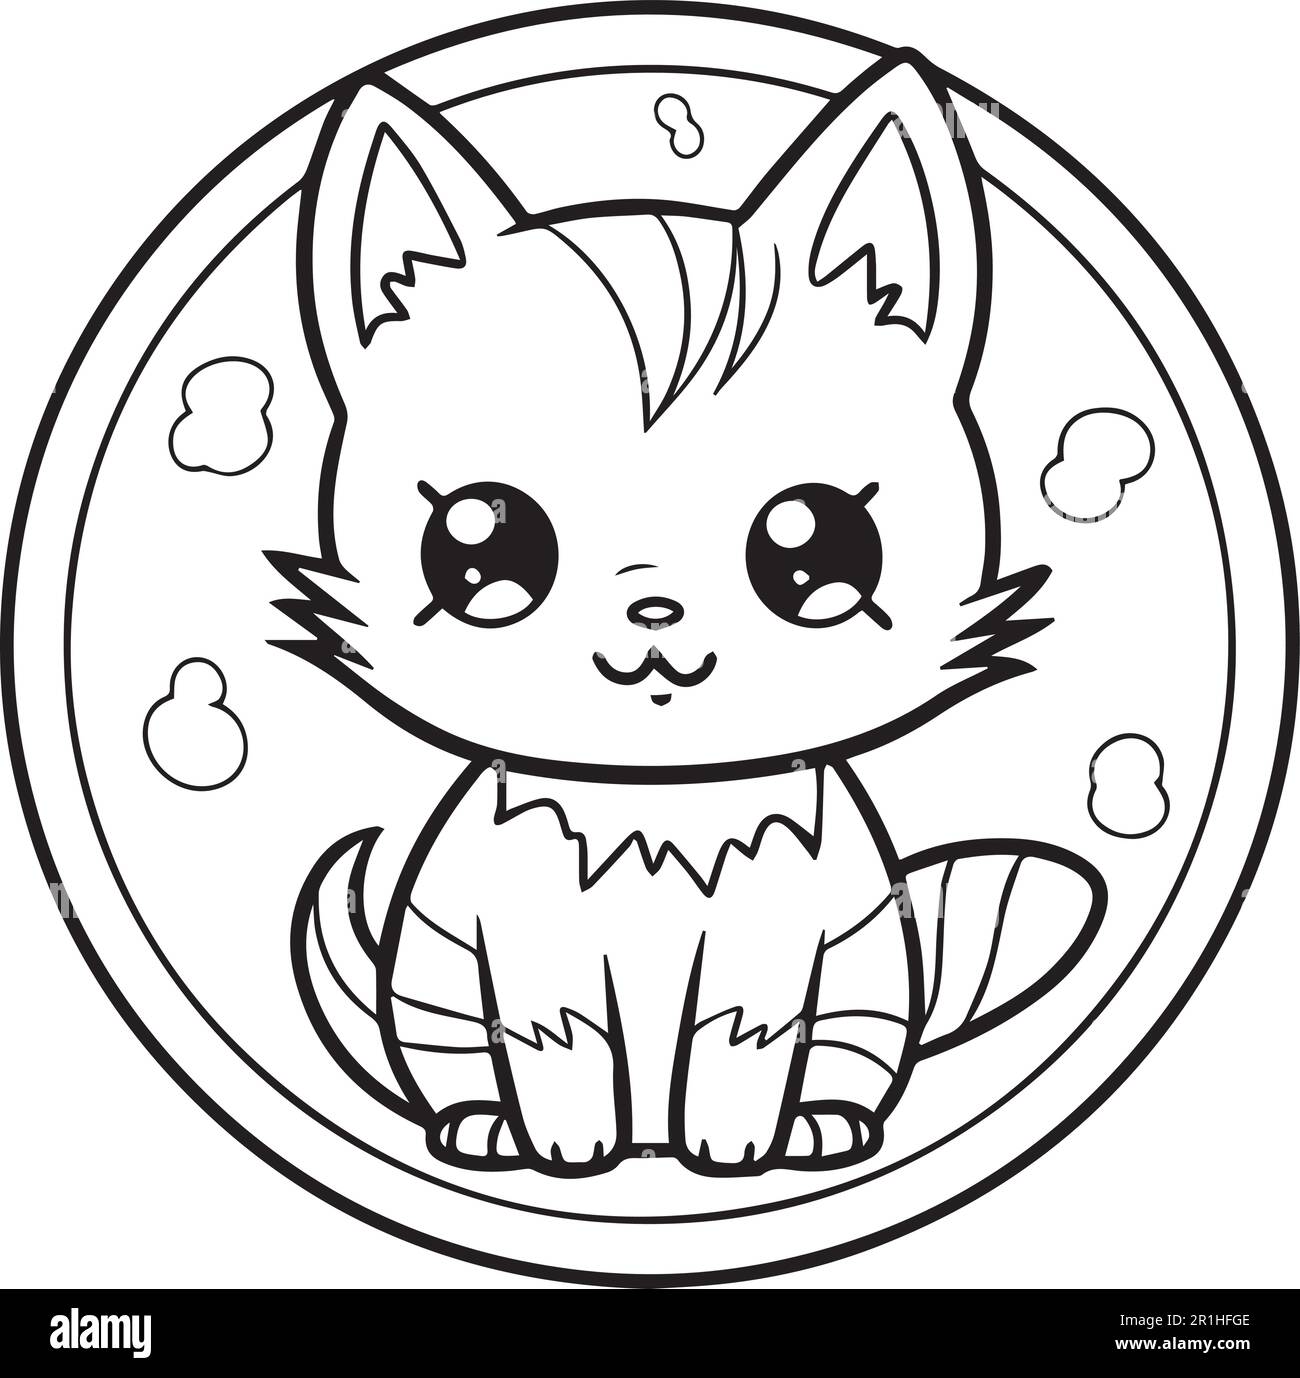 A black and white drawing of a cat sitting on a plate. A cute cat coloring page. Stock Vector